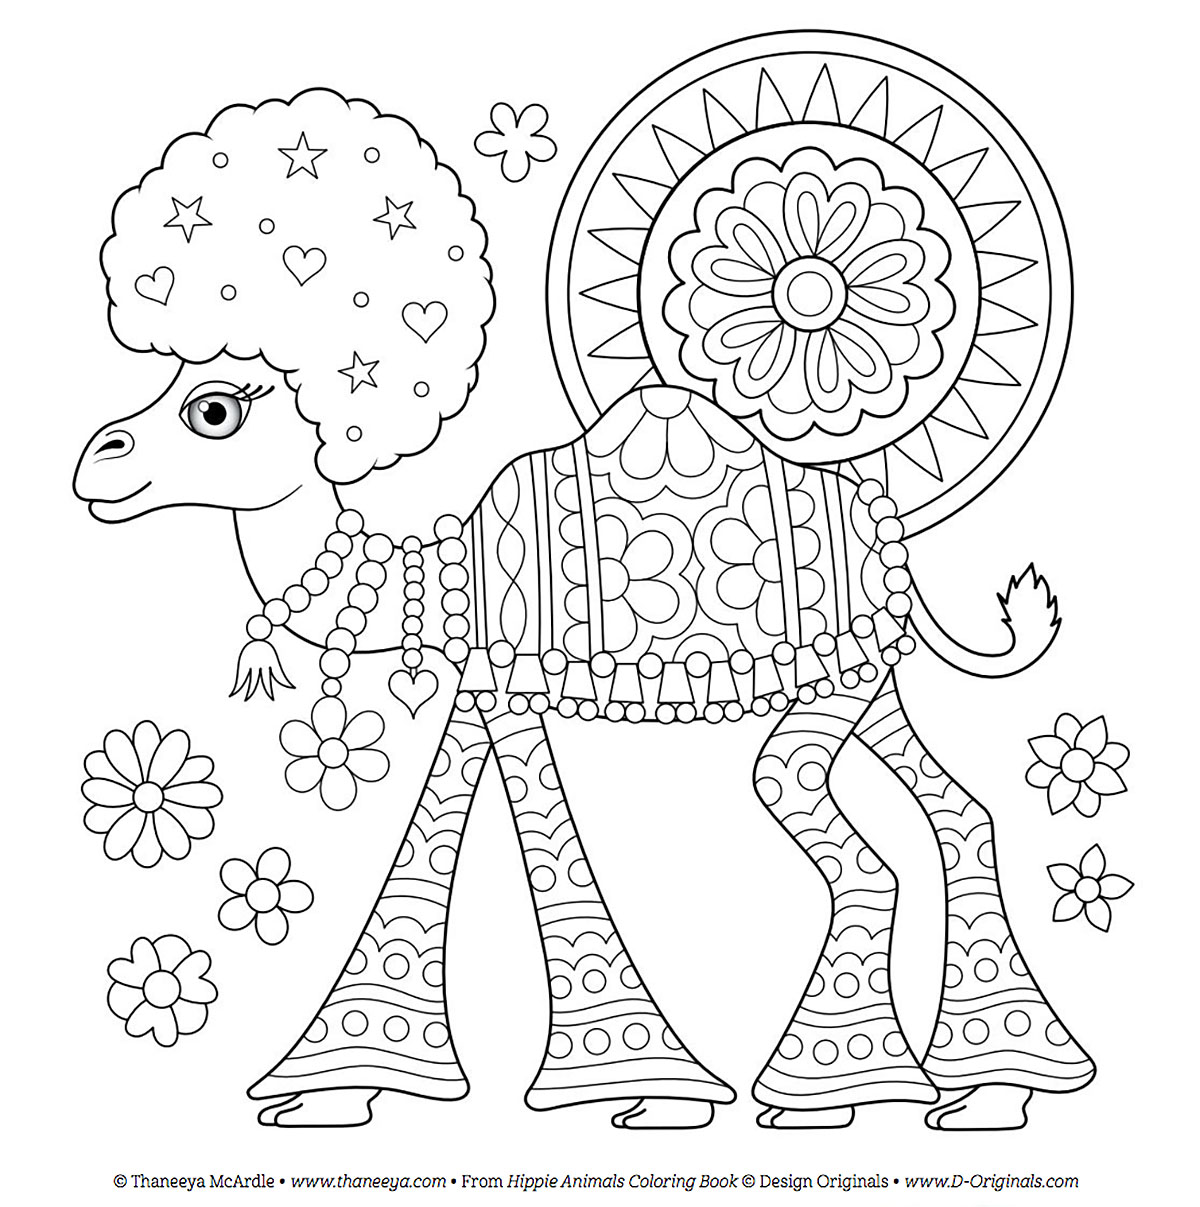 Free Coloring Pages — Thaneeya.com